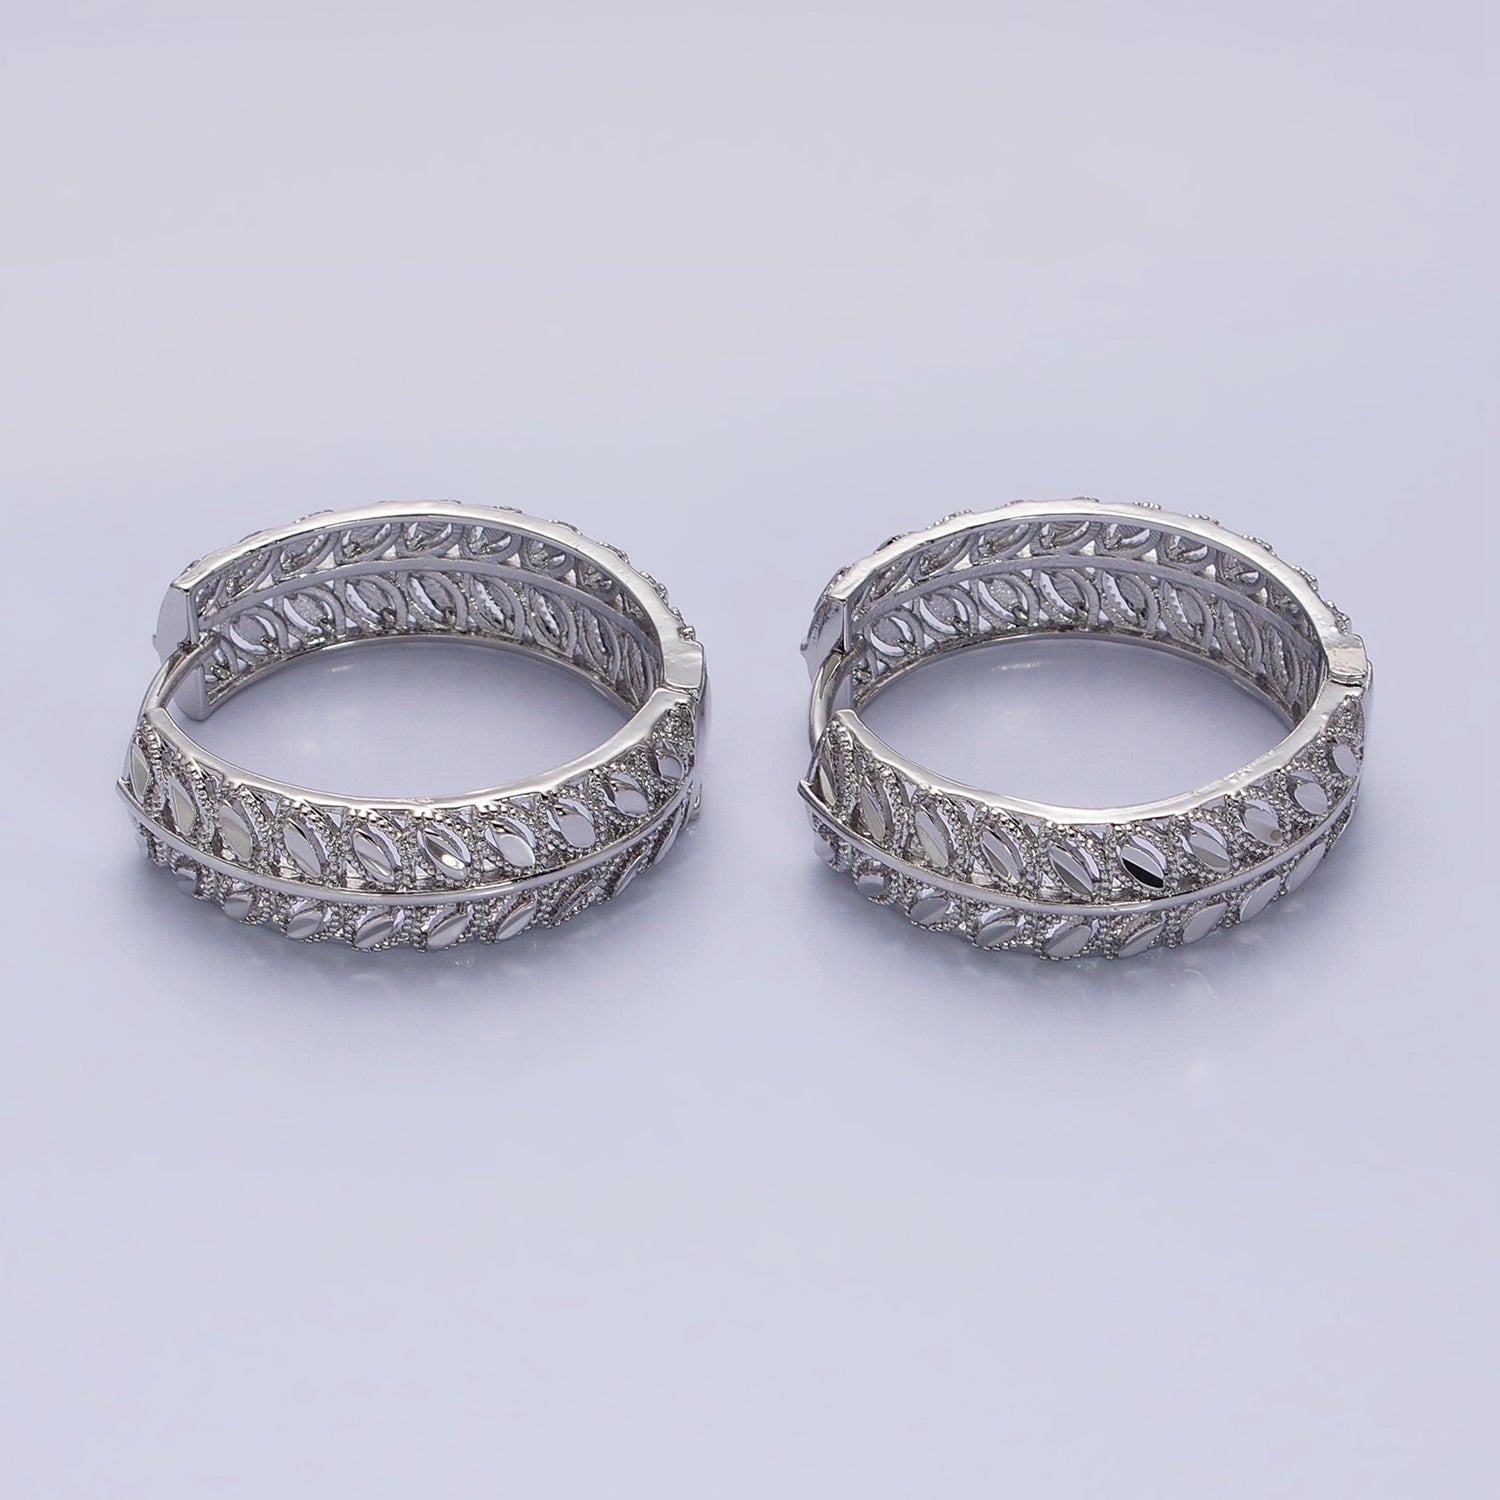 16K Gold Filled Marquise CZ V Wheat Paddy 30mm Endless Hoop Earrings in Gold & Silver | AB1433 AB1434 - DLUXCA